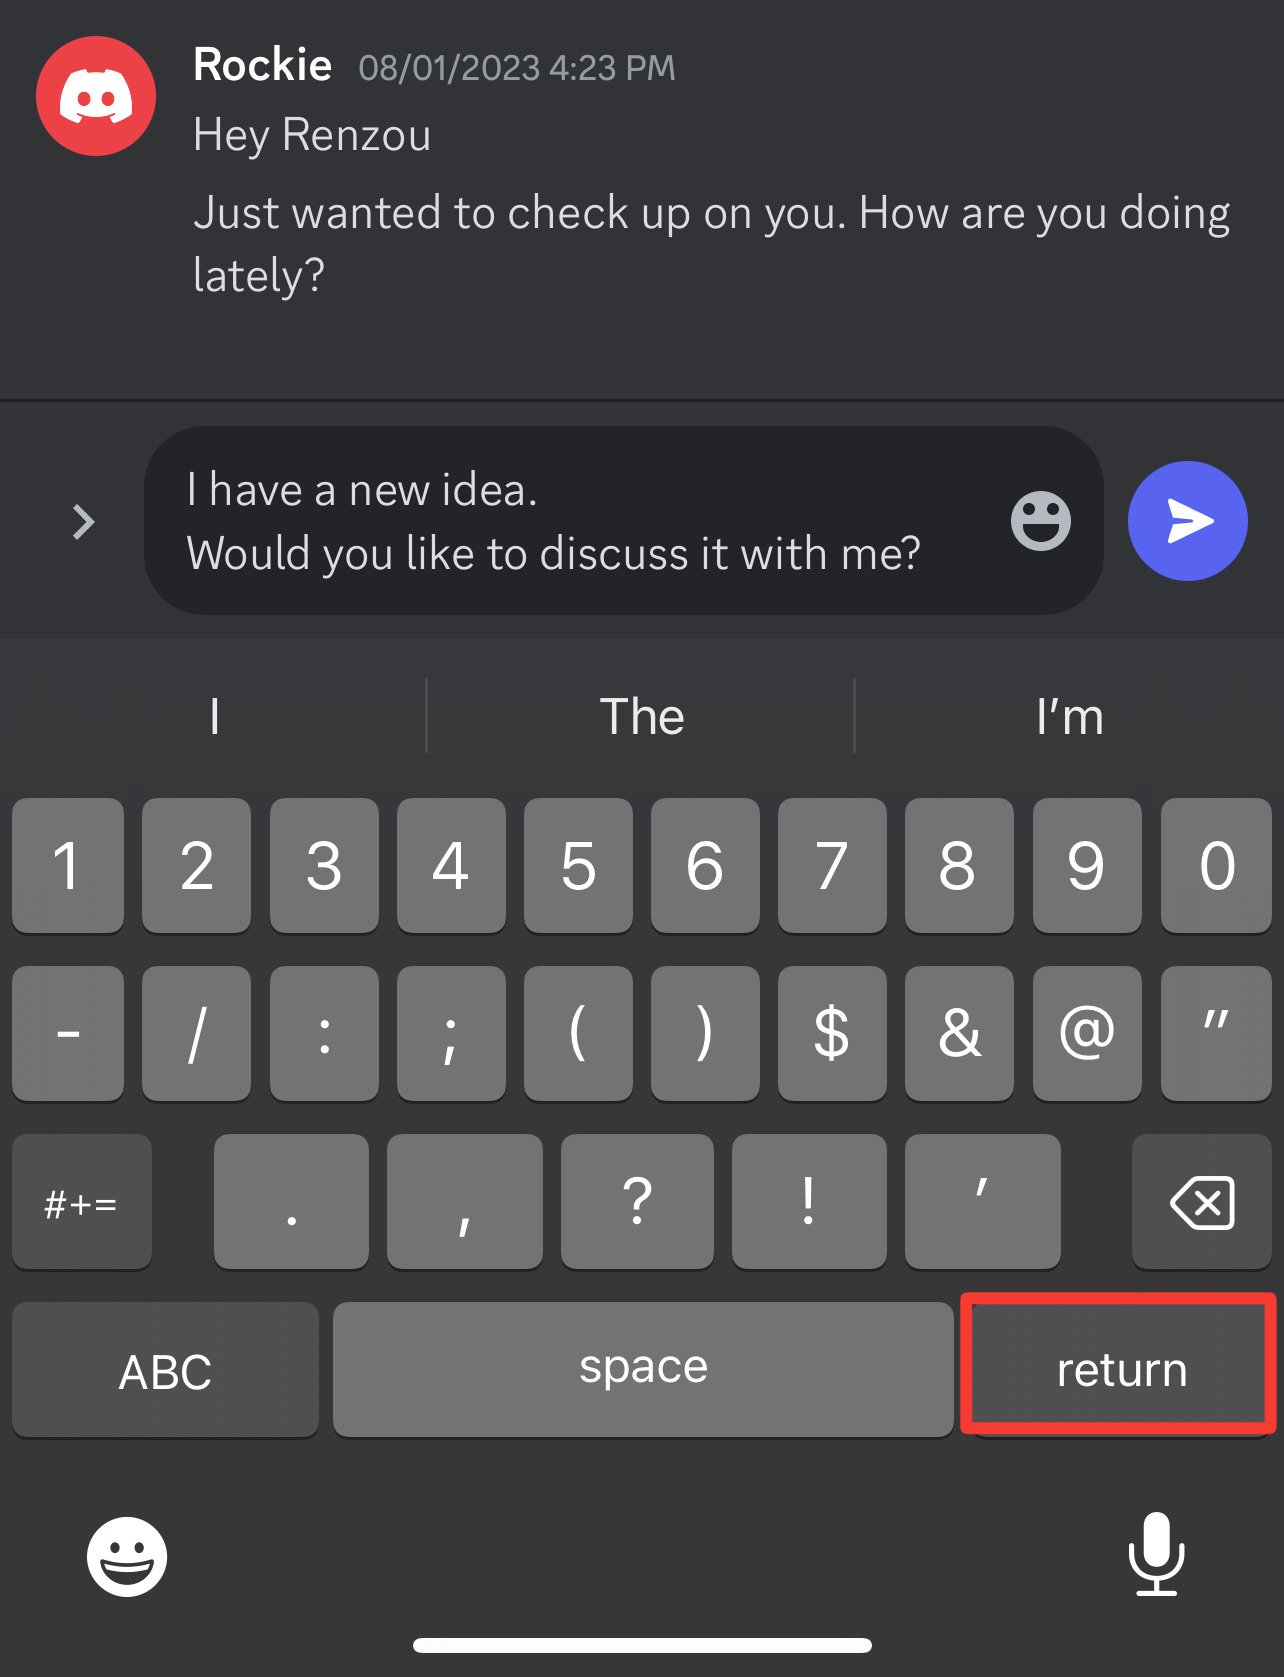 Press the return button on Discord mobile